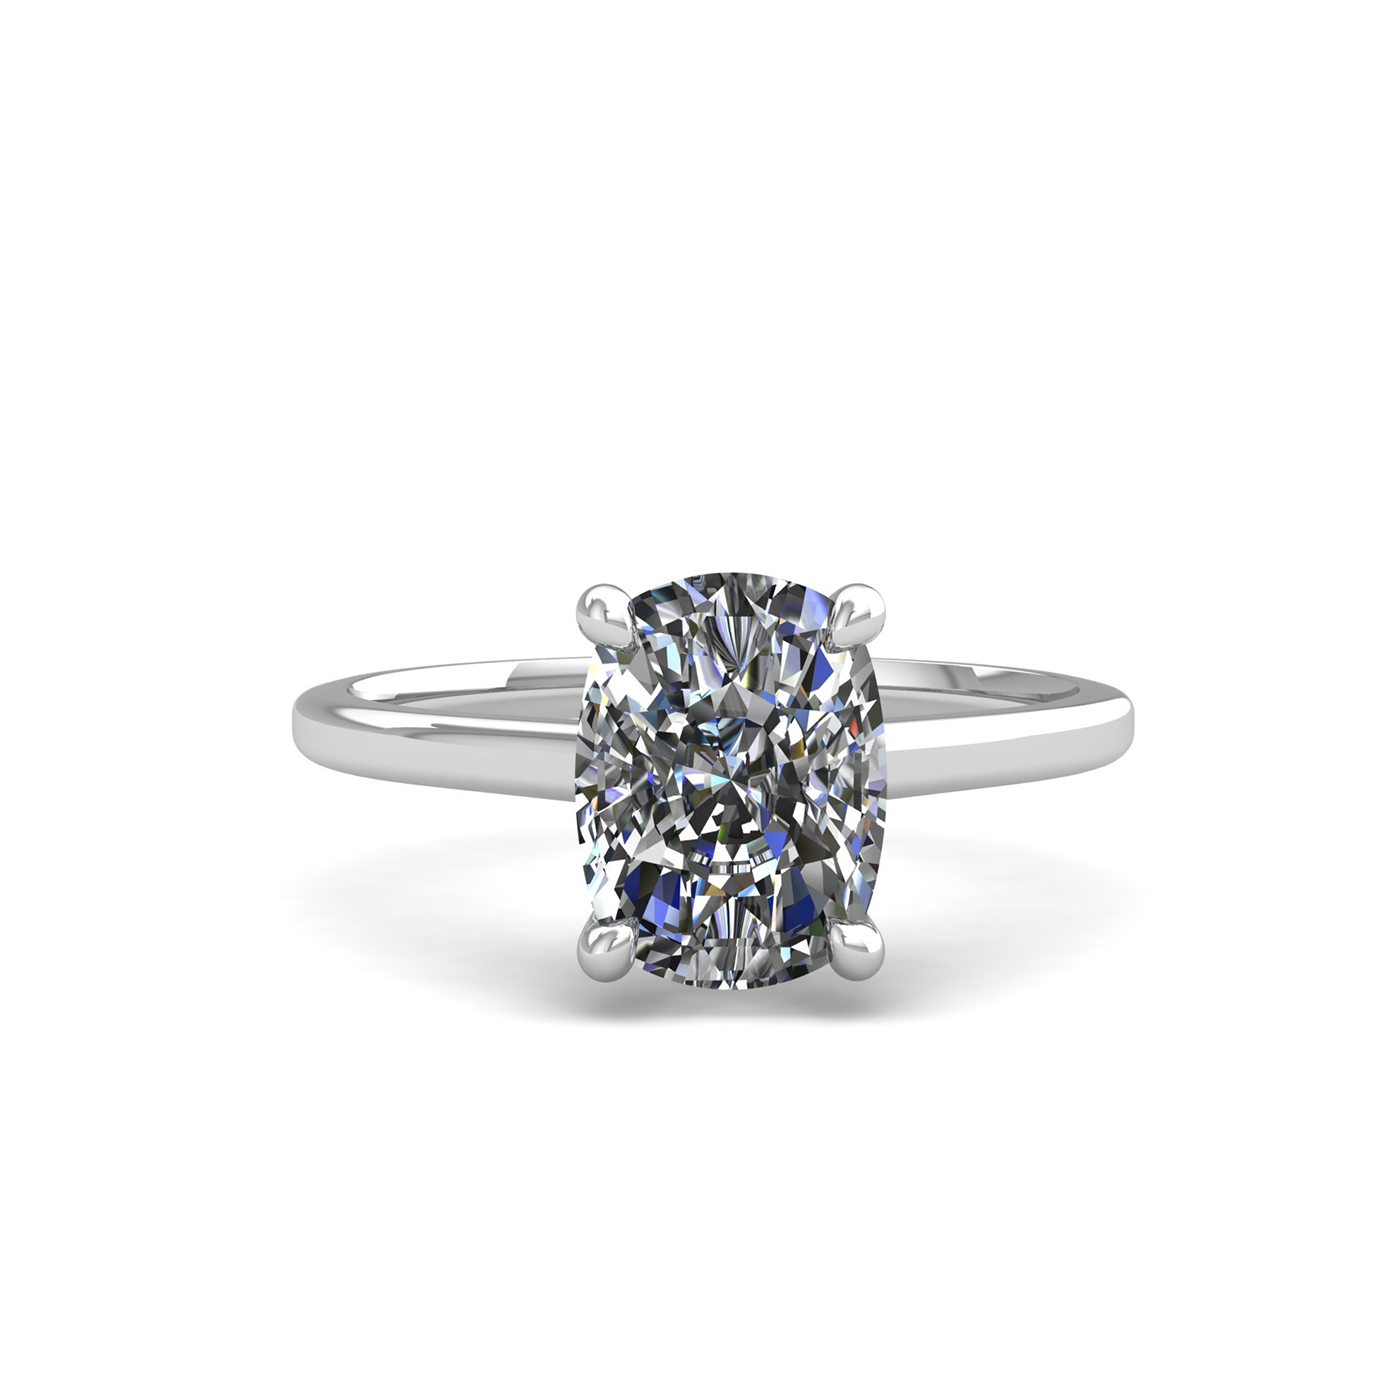 18k white gold  2.00 ct 4 prongs solitaire elongated cushion cut diamond engagement ring with whisper thin band